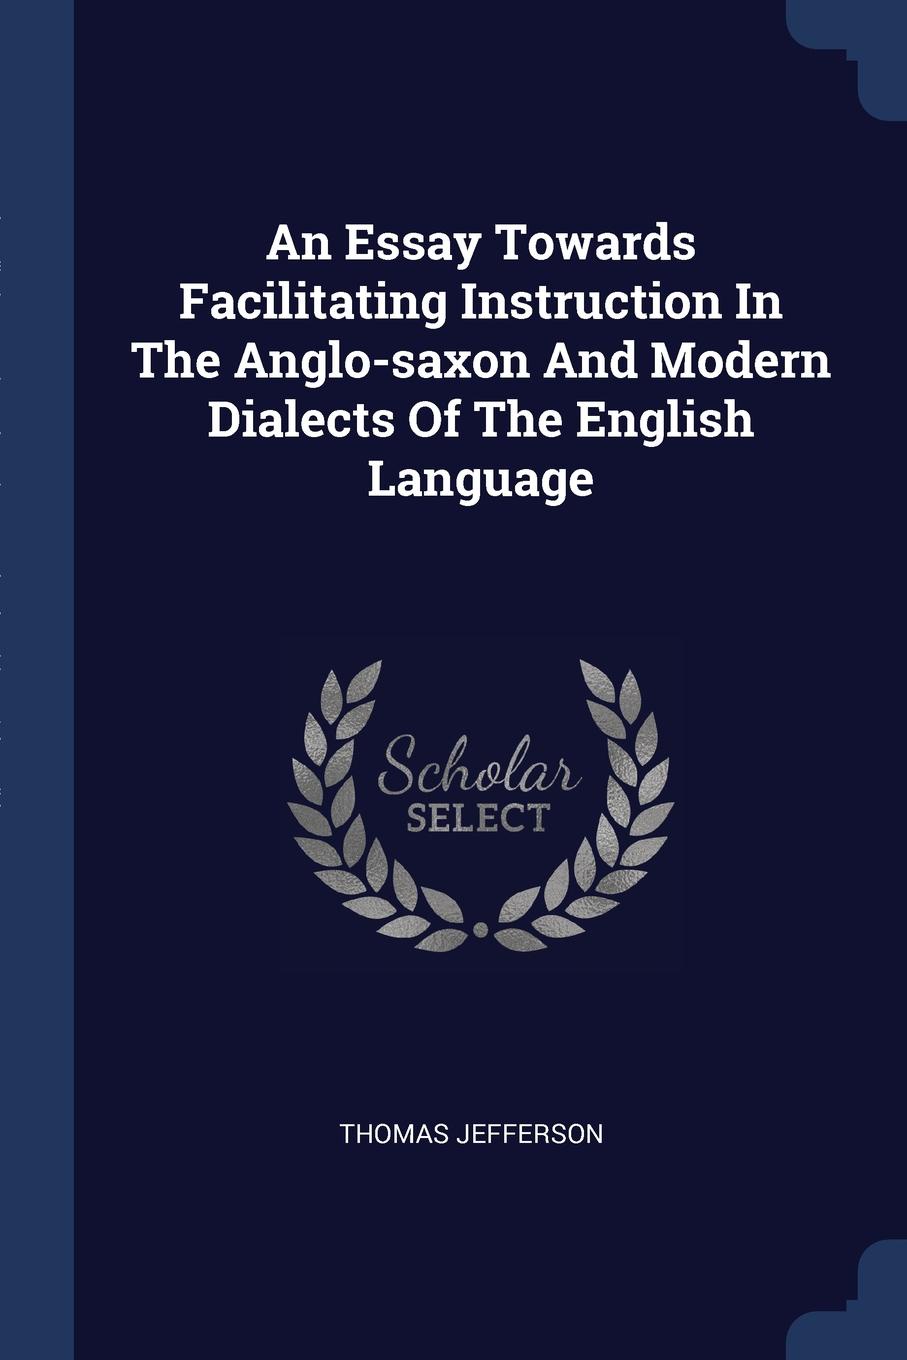 An Essay Towards Facilitating Instruction In The Anglo-saxon And Modern Dialects Of The English Language